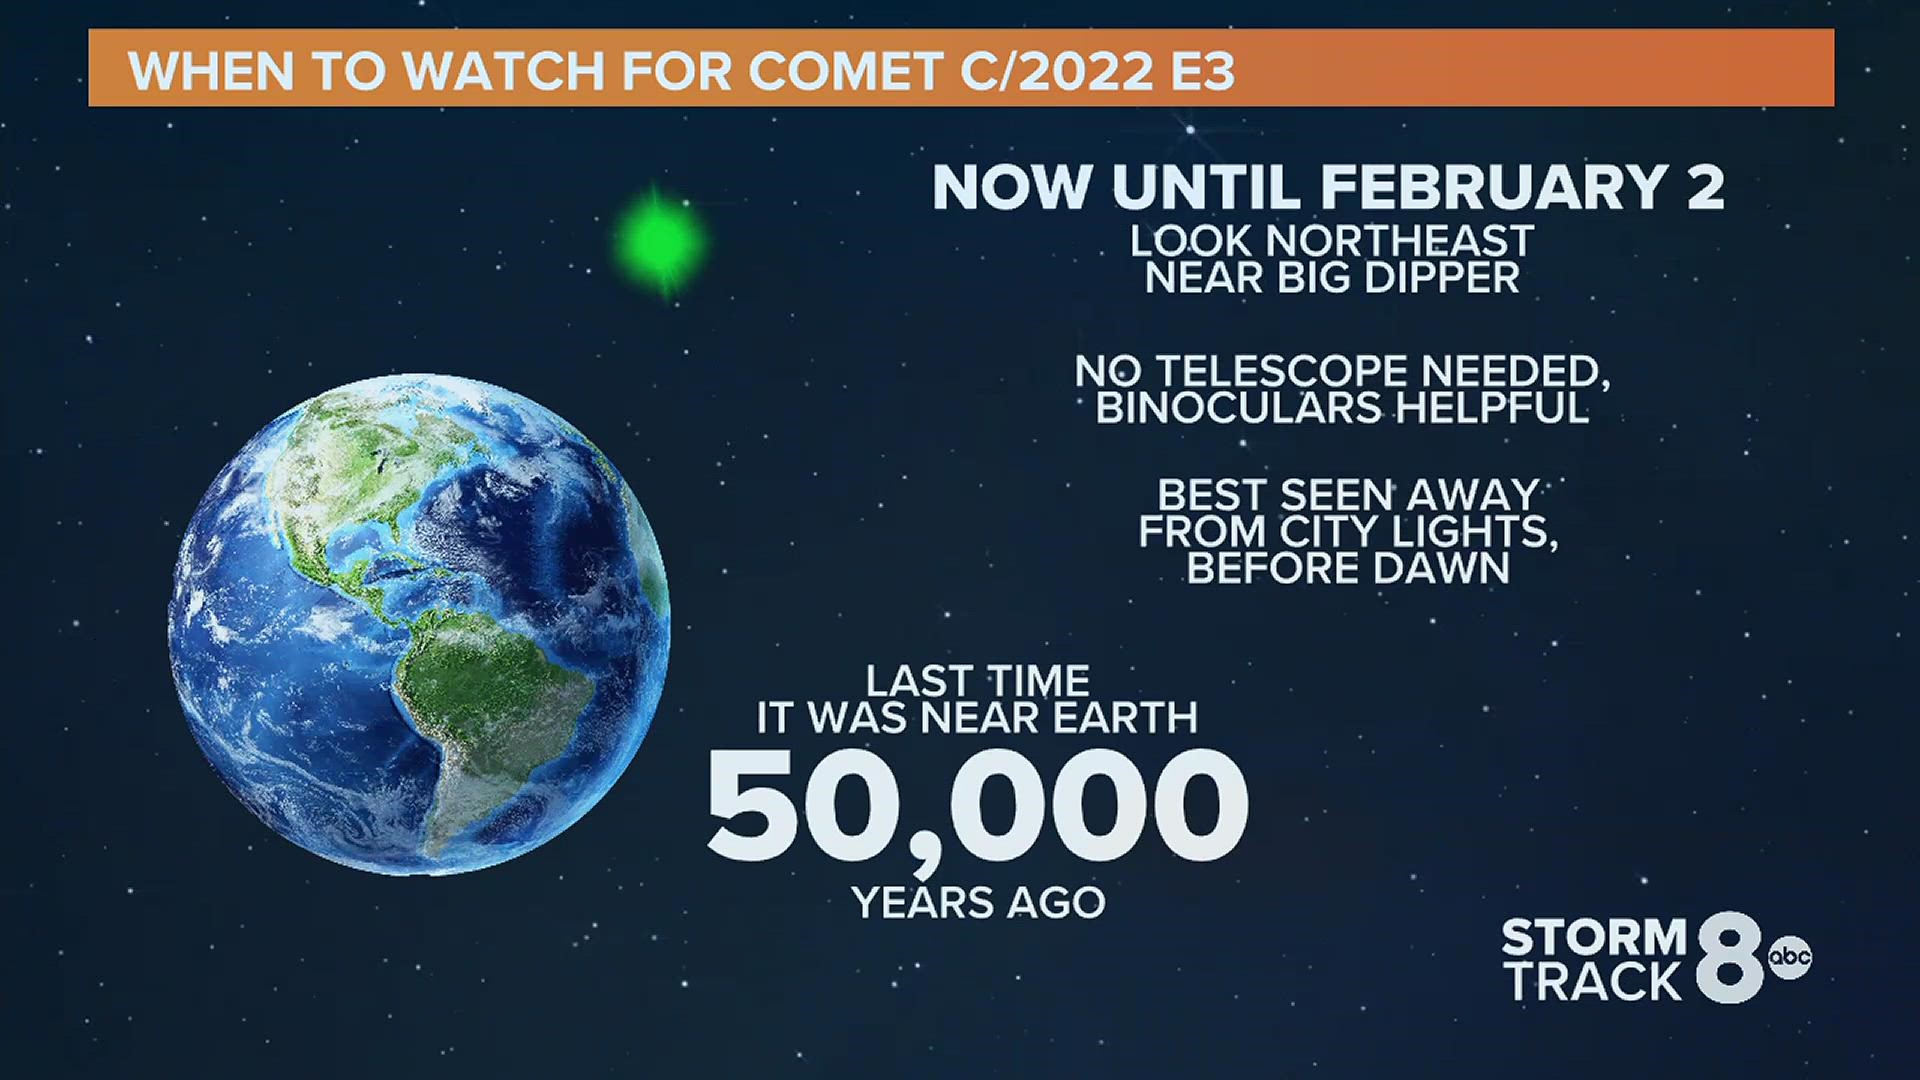 Comet C2022/ E3 will make its closest approach to Earth in nearly 50,000 years for the first couple of days of February.